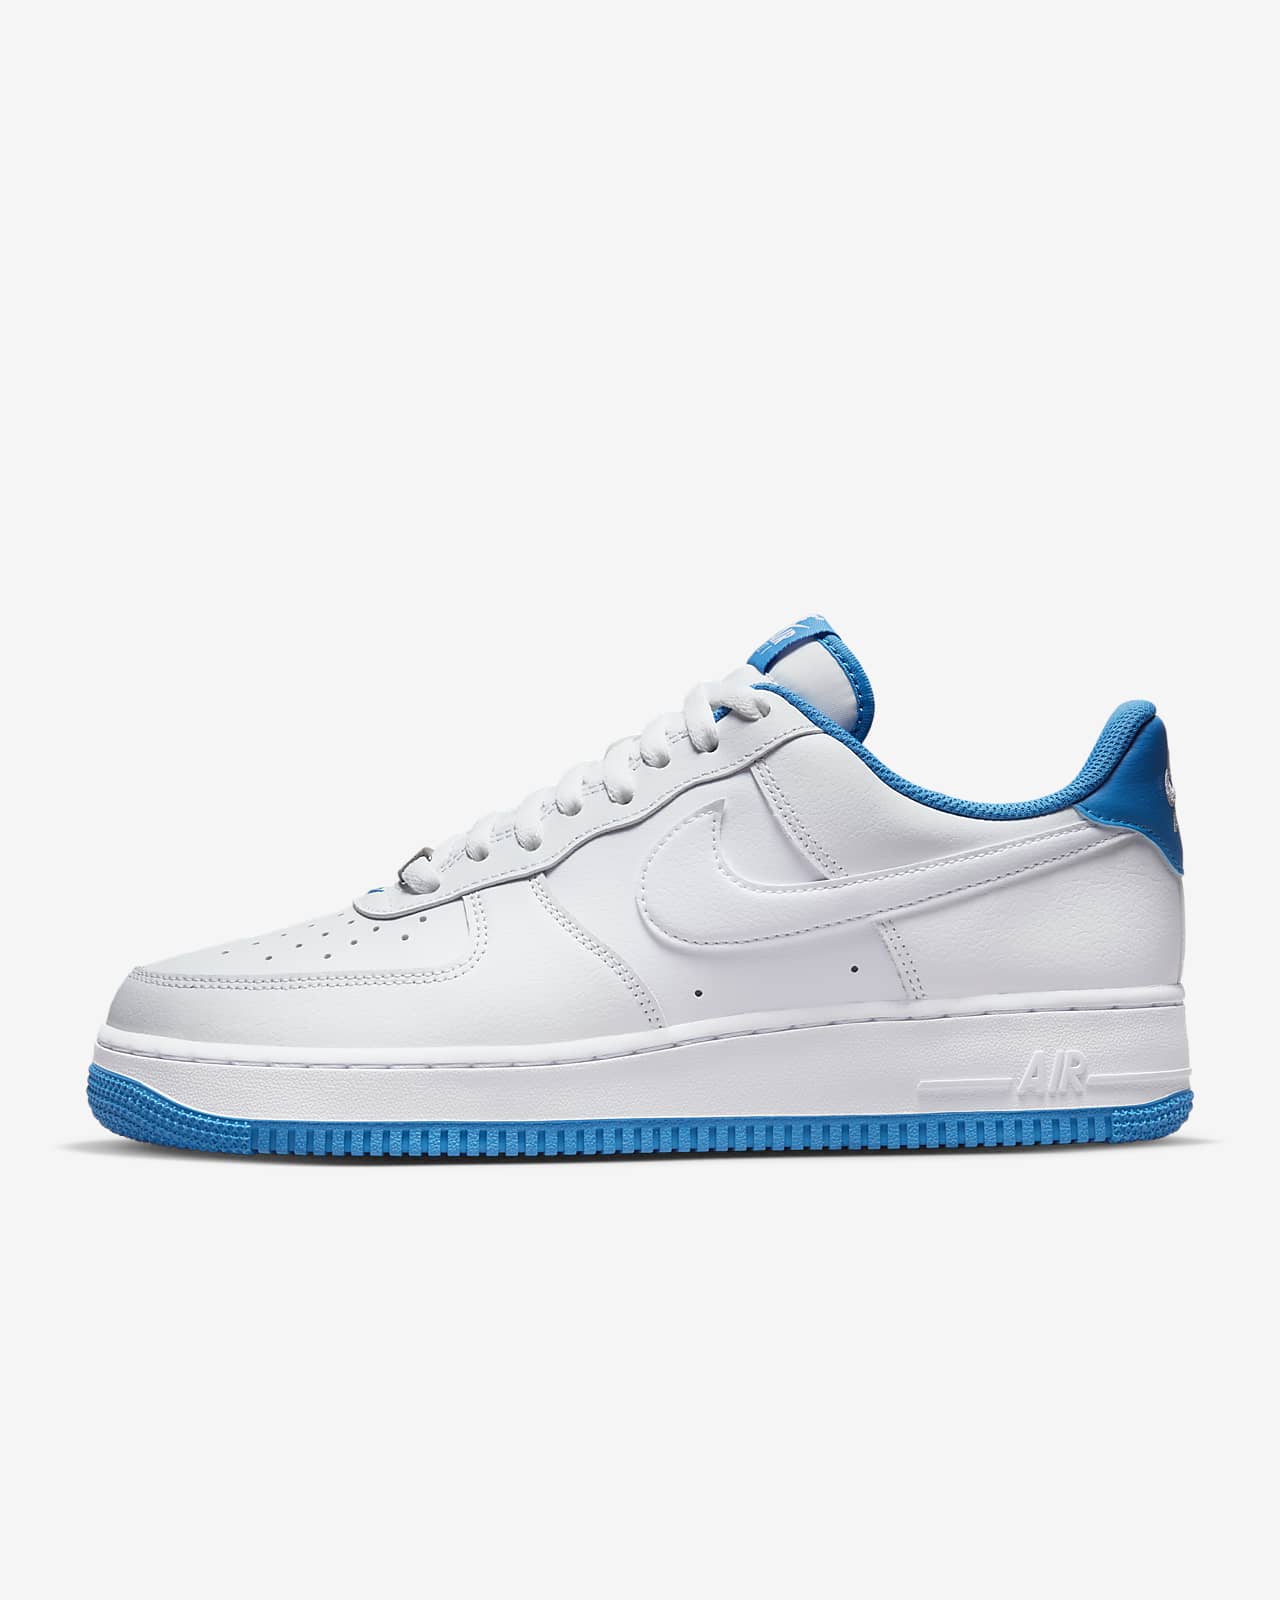 Nike Air Force air force 1 all star 1 '07 Men's Shoes. Nike.com